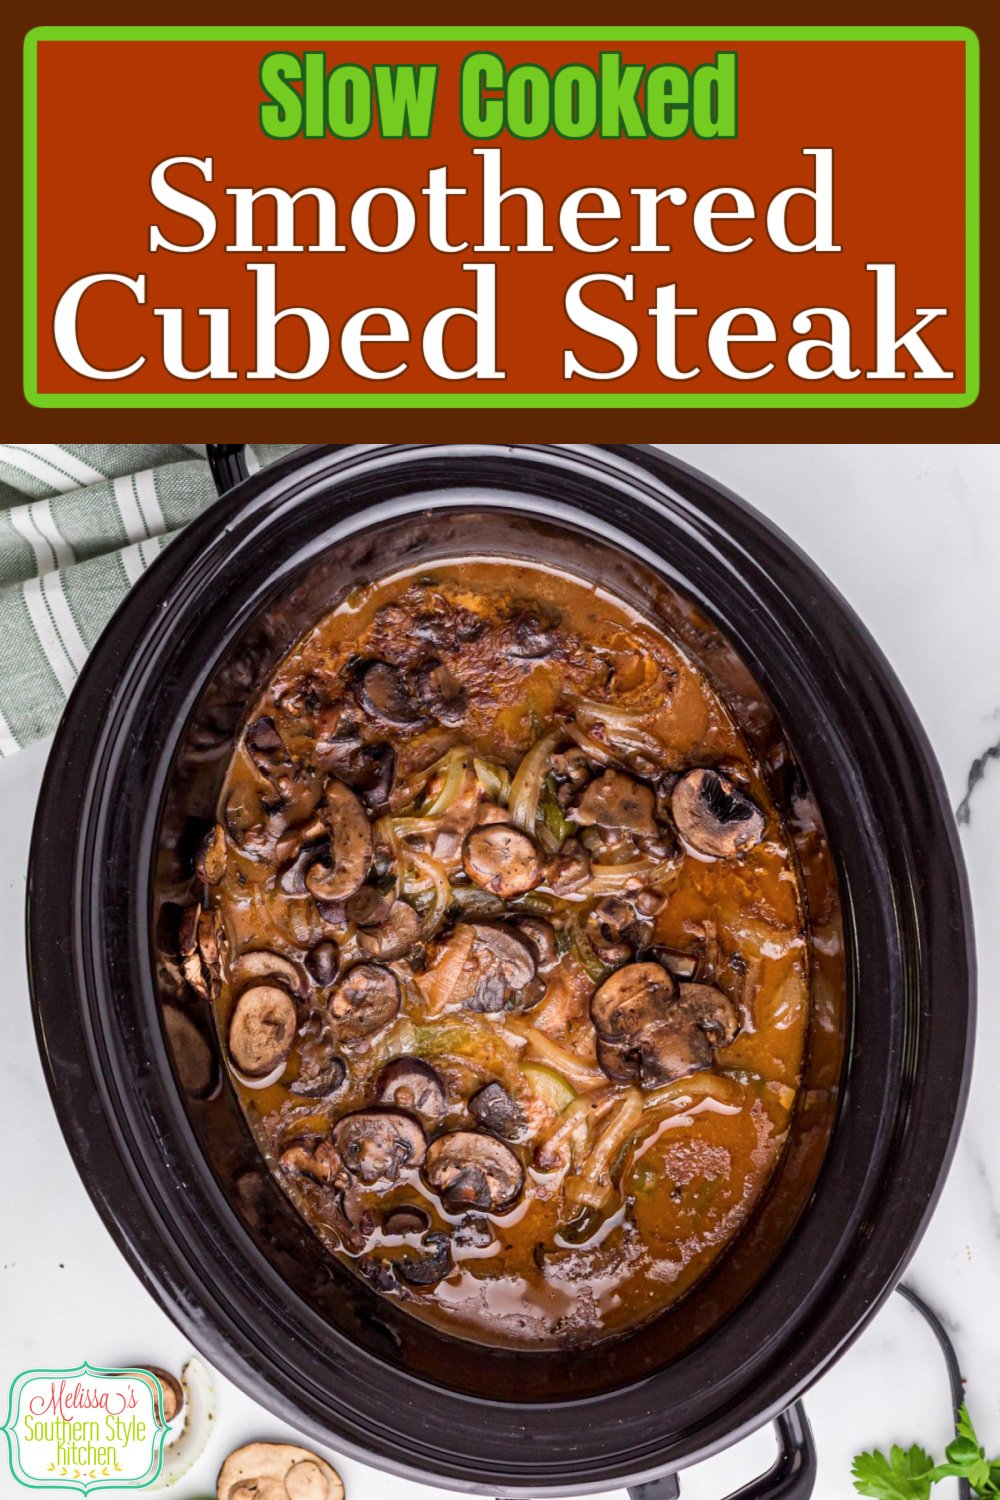 Make tender Slow Cooked Smothered Cubed Steak simmered in a flavorful gravy #slowcookersteak #steakrecipes #cubesteakwithgravy #cubedsteakrecipes #smotheredsteak #dinner #crockpotrecipes #beef #dinnerideas #southernrecipes #southernfood via @melissasssk